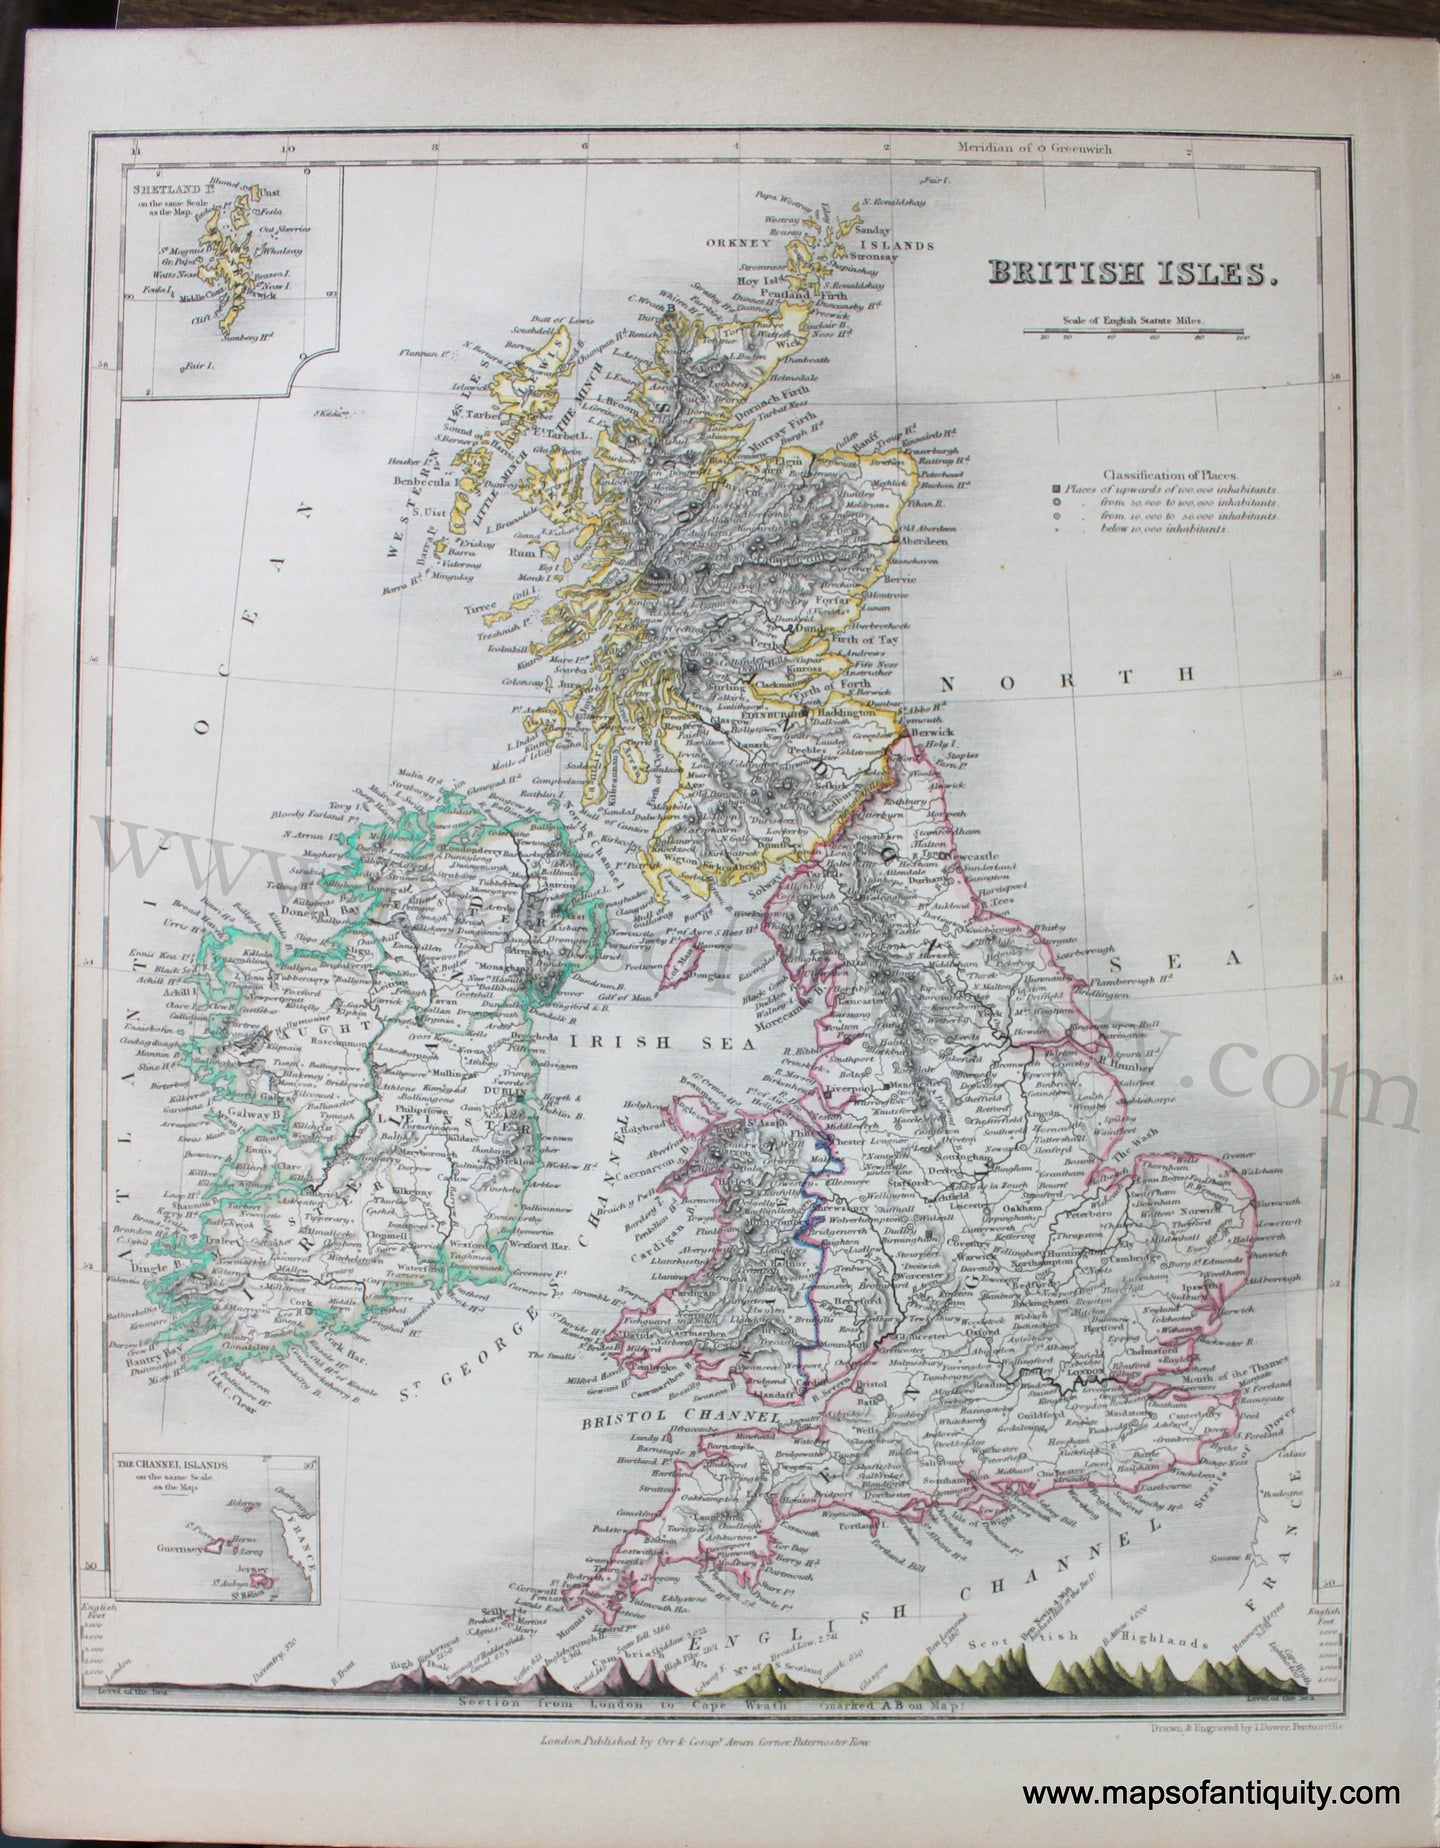 Genuine-Antique-Map-British-Isles-Europe-England-1850-Petermann-/-Orr-/-Dower-Maps-Of-Antiquity-1800s-19th-century